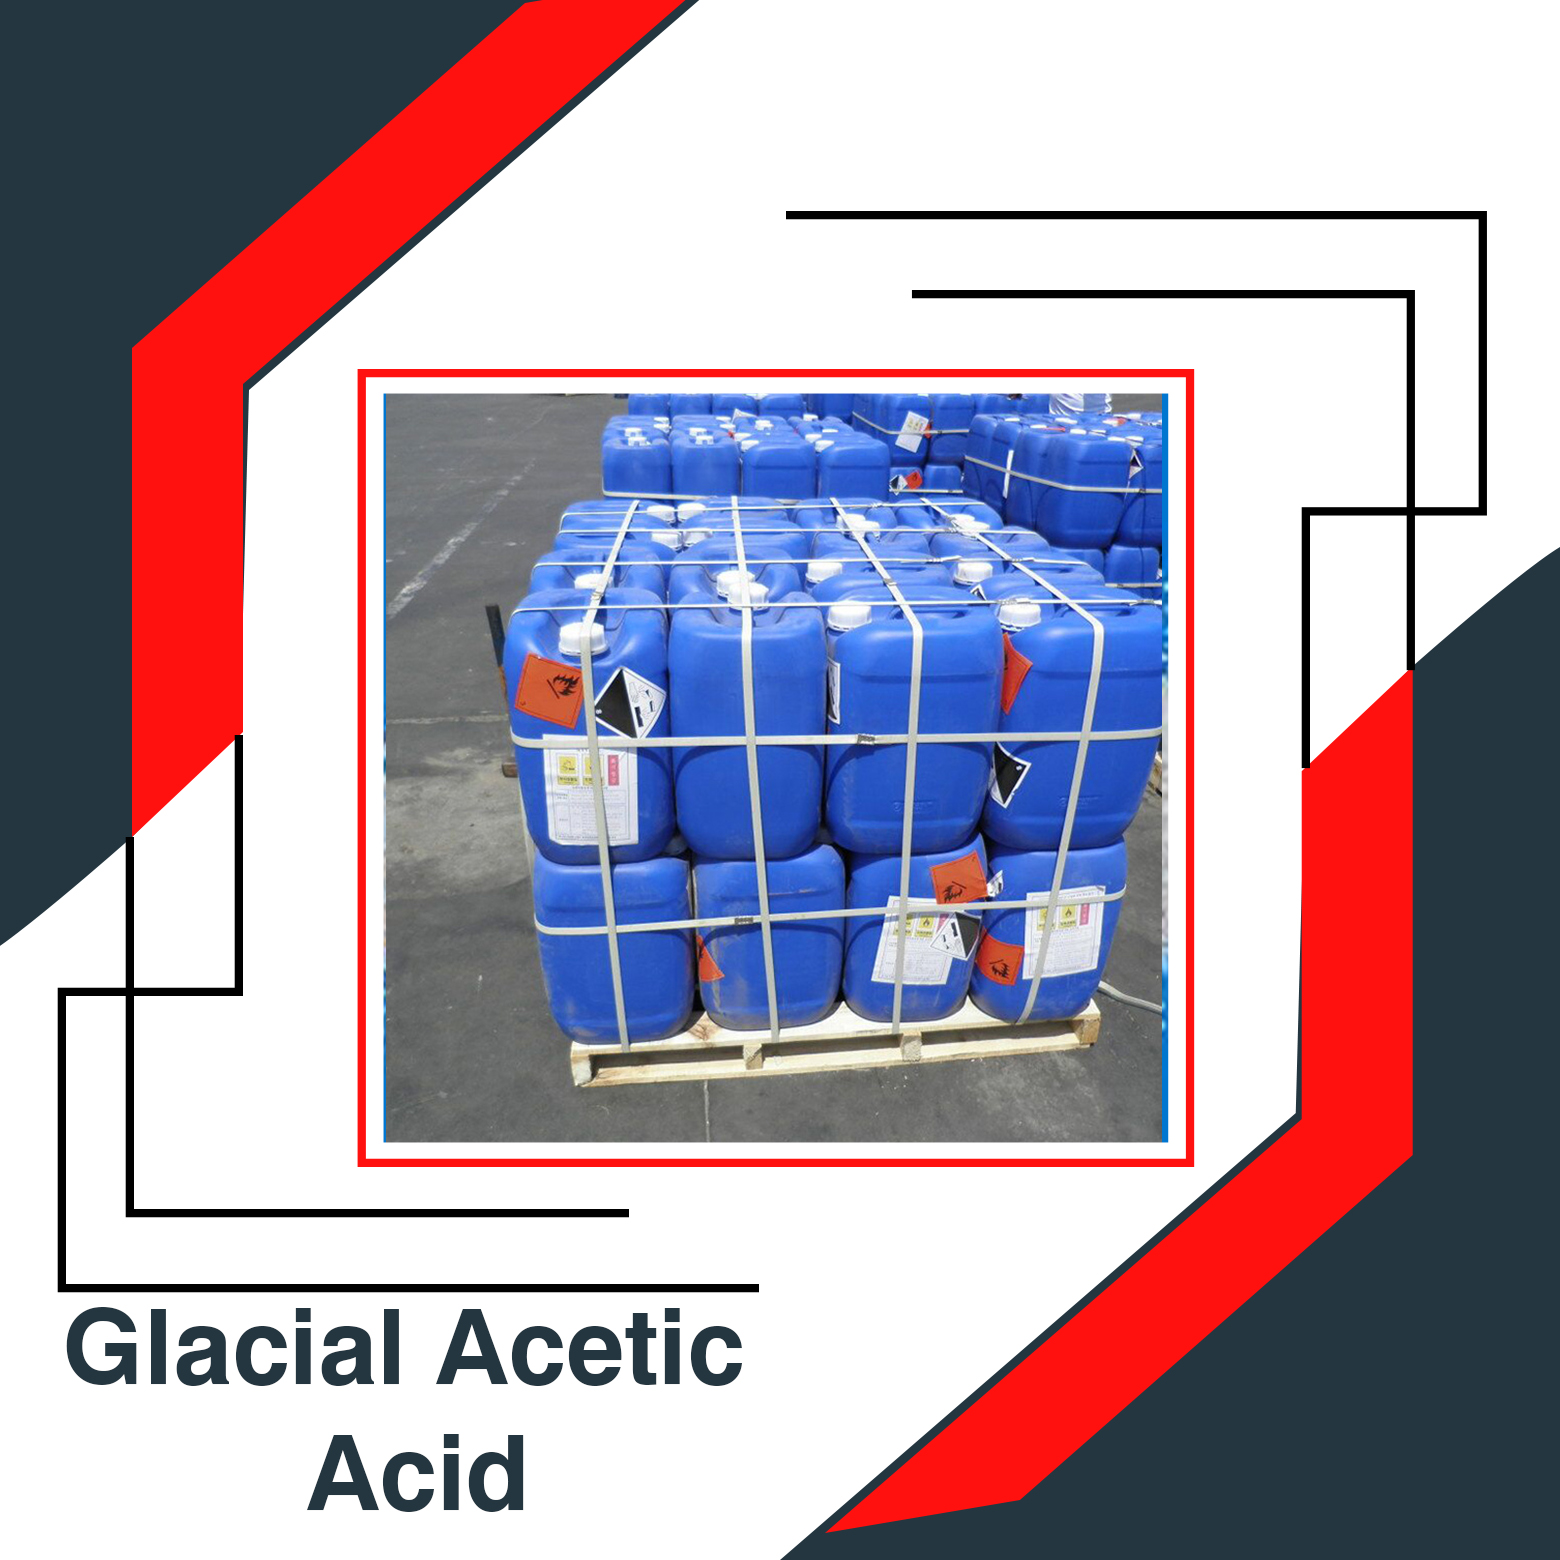 Glacial Acetic Acid In Sikasso